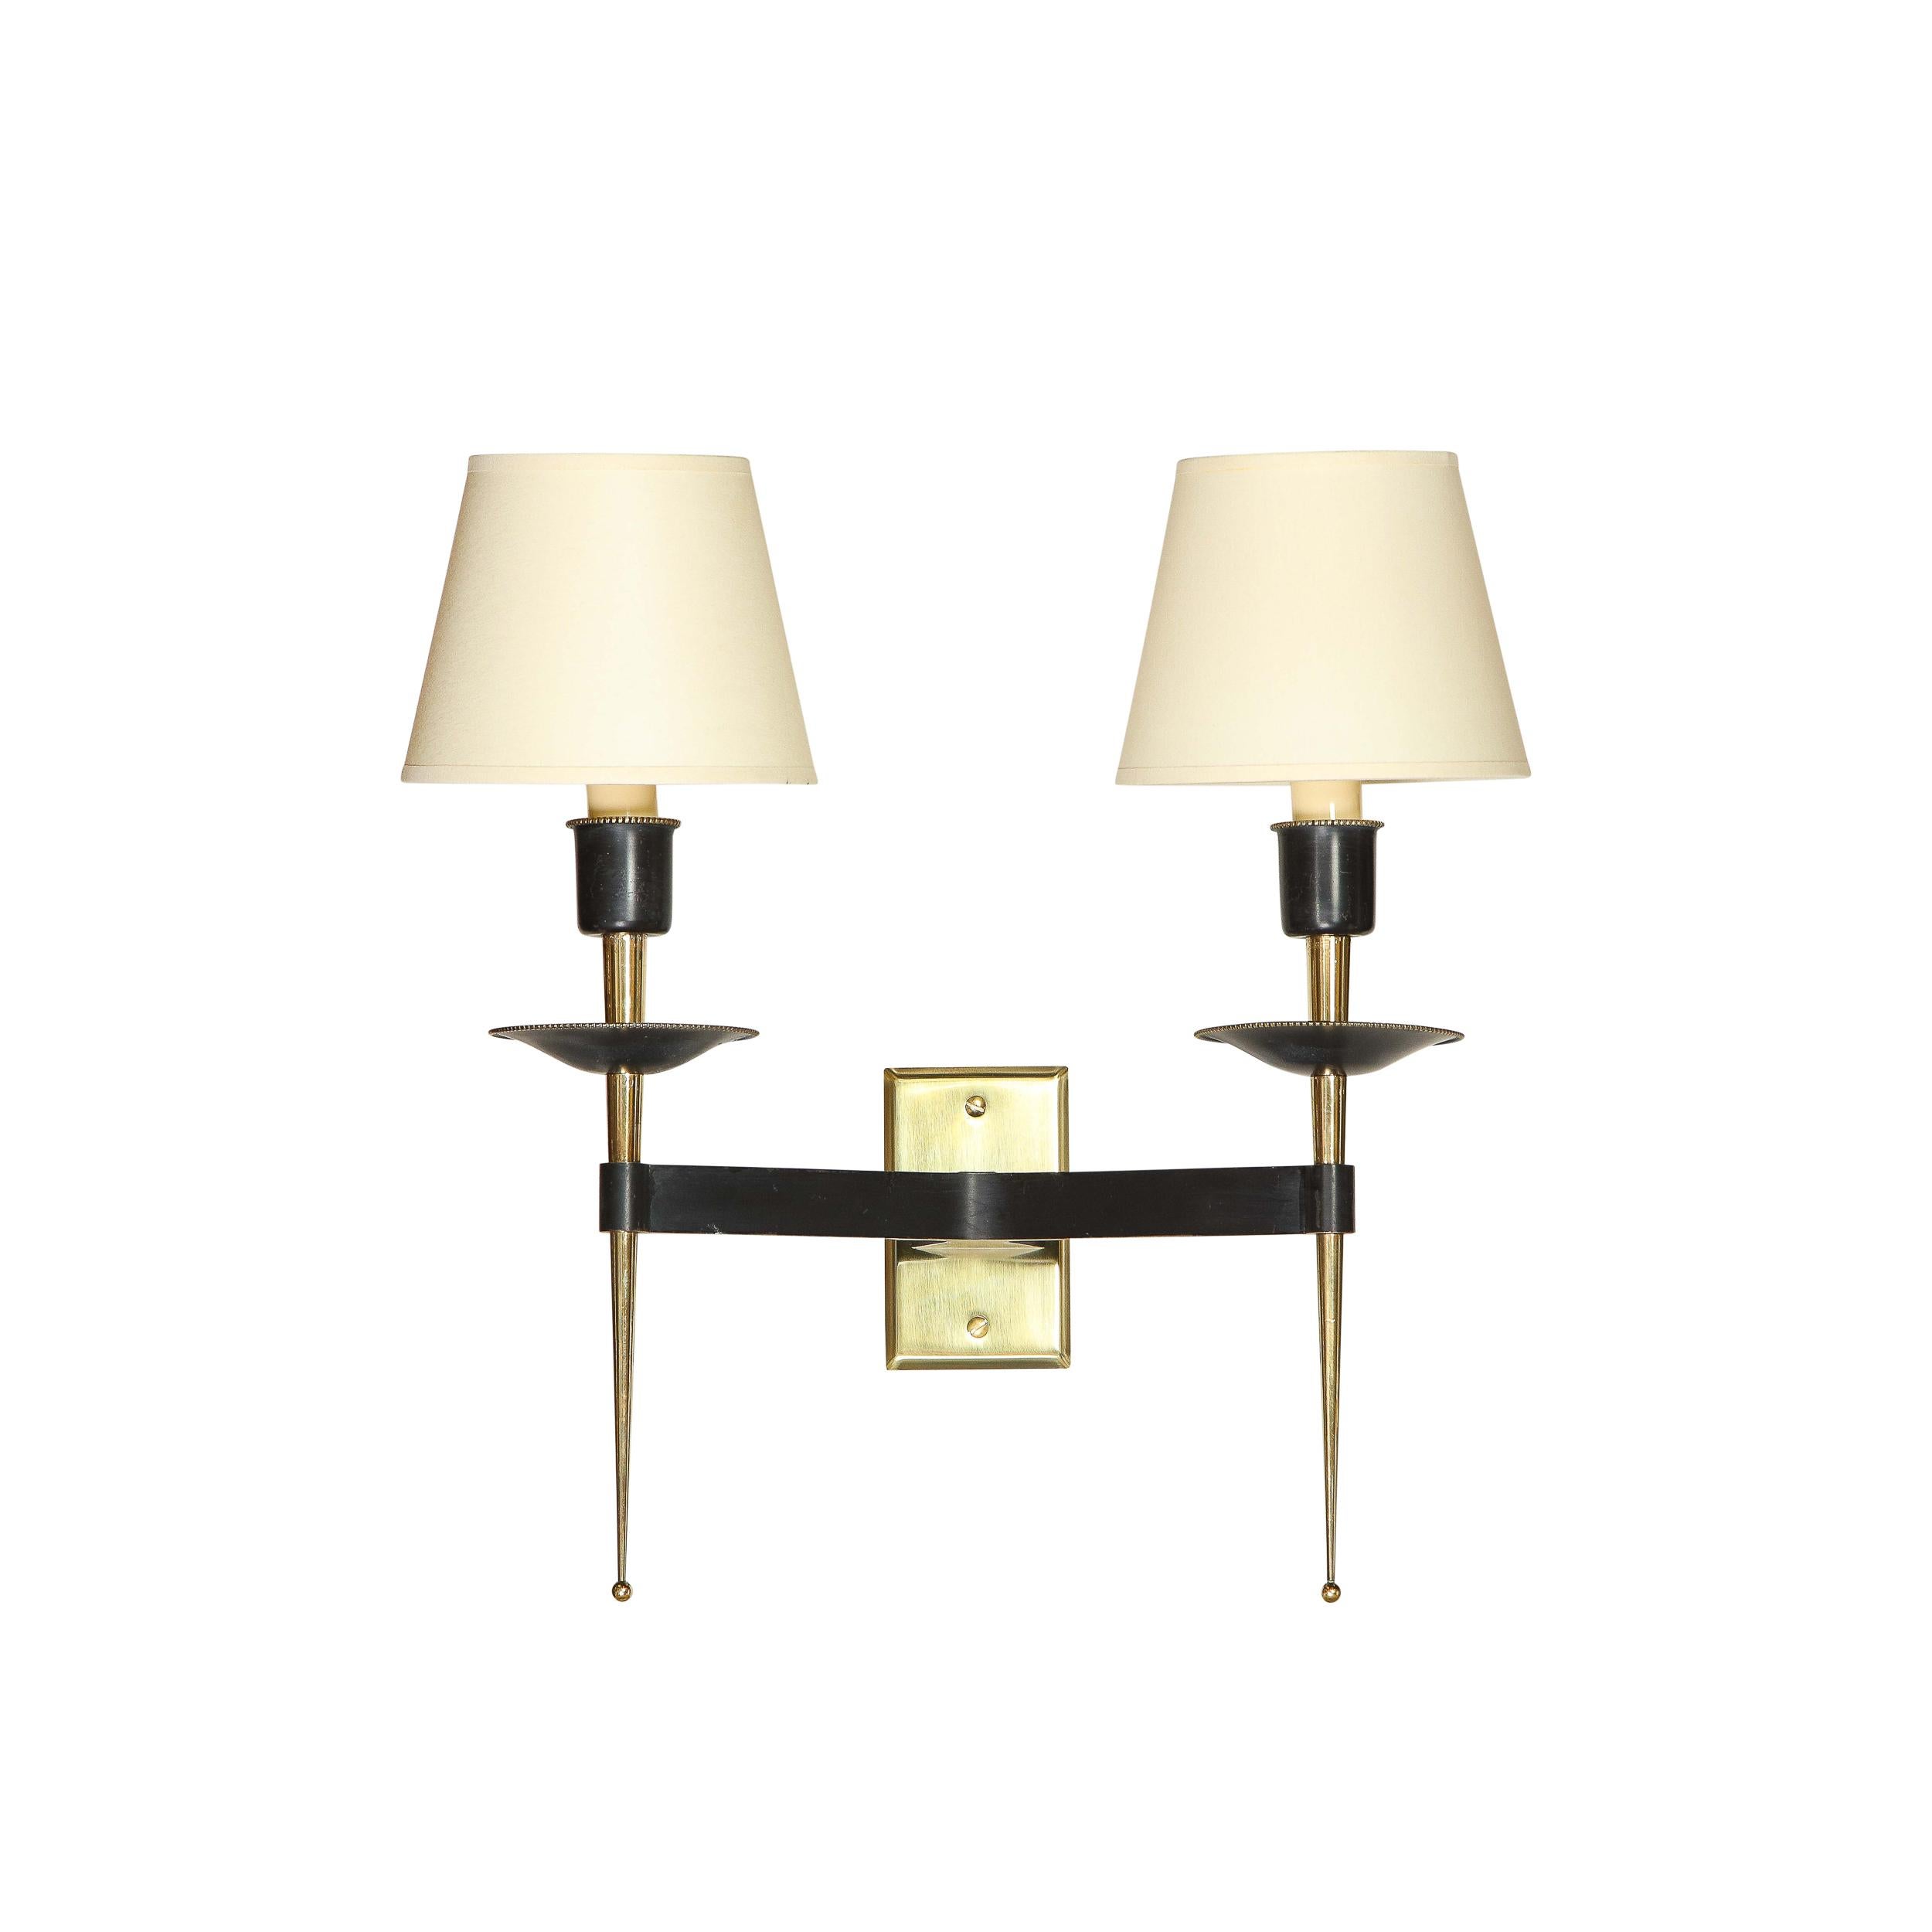 This stunning and graphic pair of Mid-Century Modern sconces were realized in France, circa 1950. They feature cylindrical brass bodies that attach to a rectangular polished brass back plate via two sculptural black enamel supports. This black